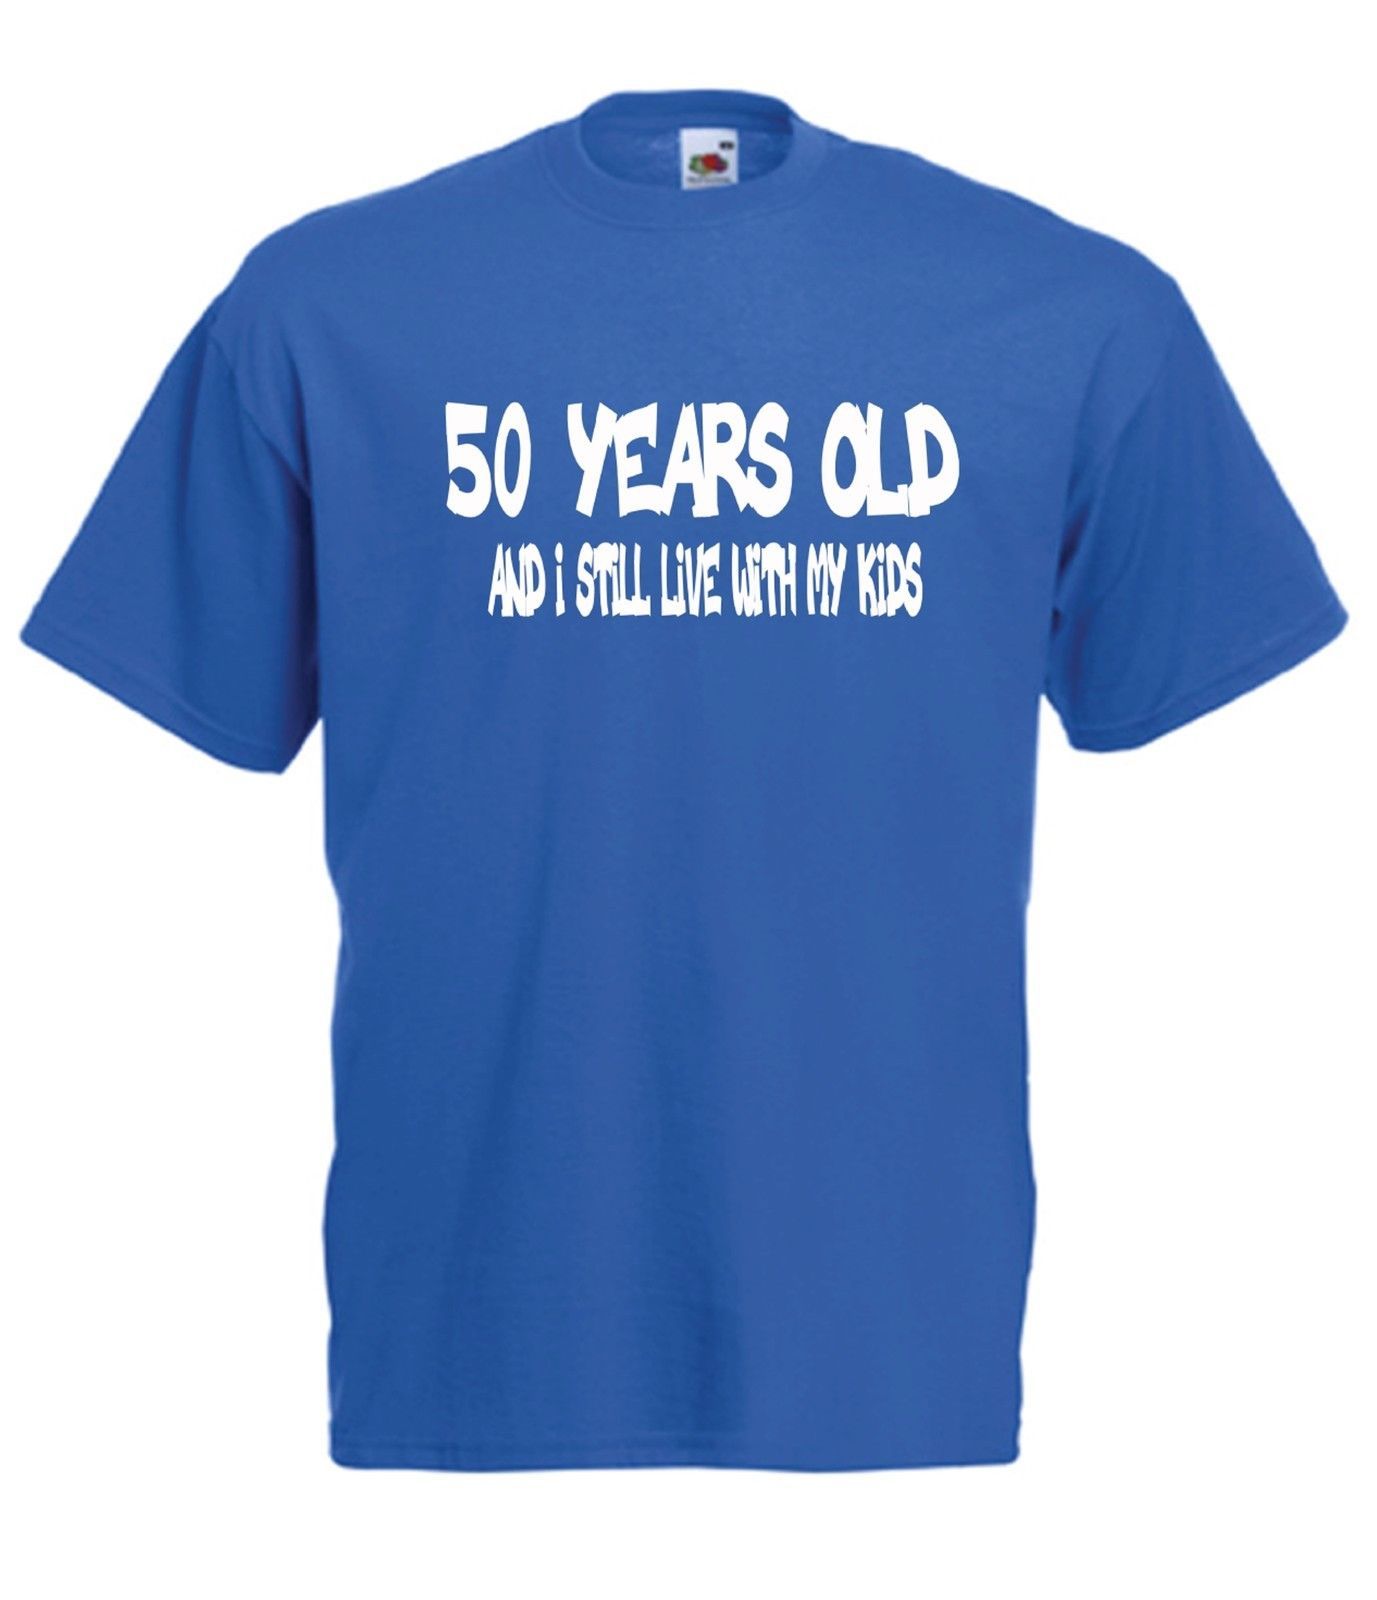 50TH BIRTHDAY party funny fathers mothers xmas gift idea mens womens T  SHIRT TOP Funny free shipping Casual tee